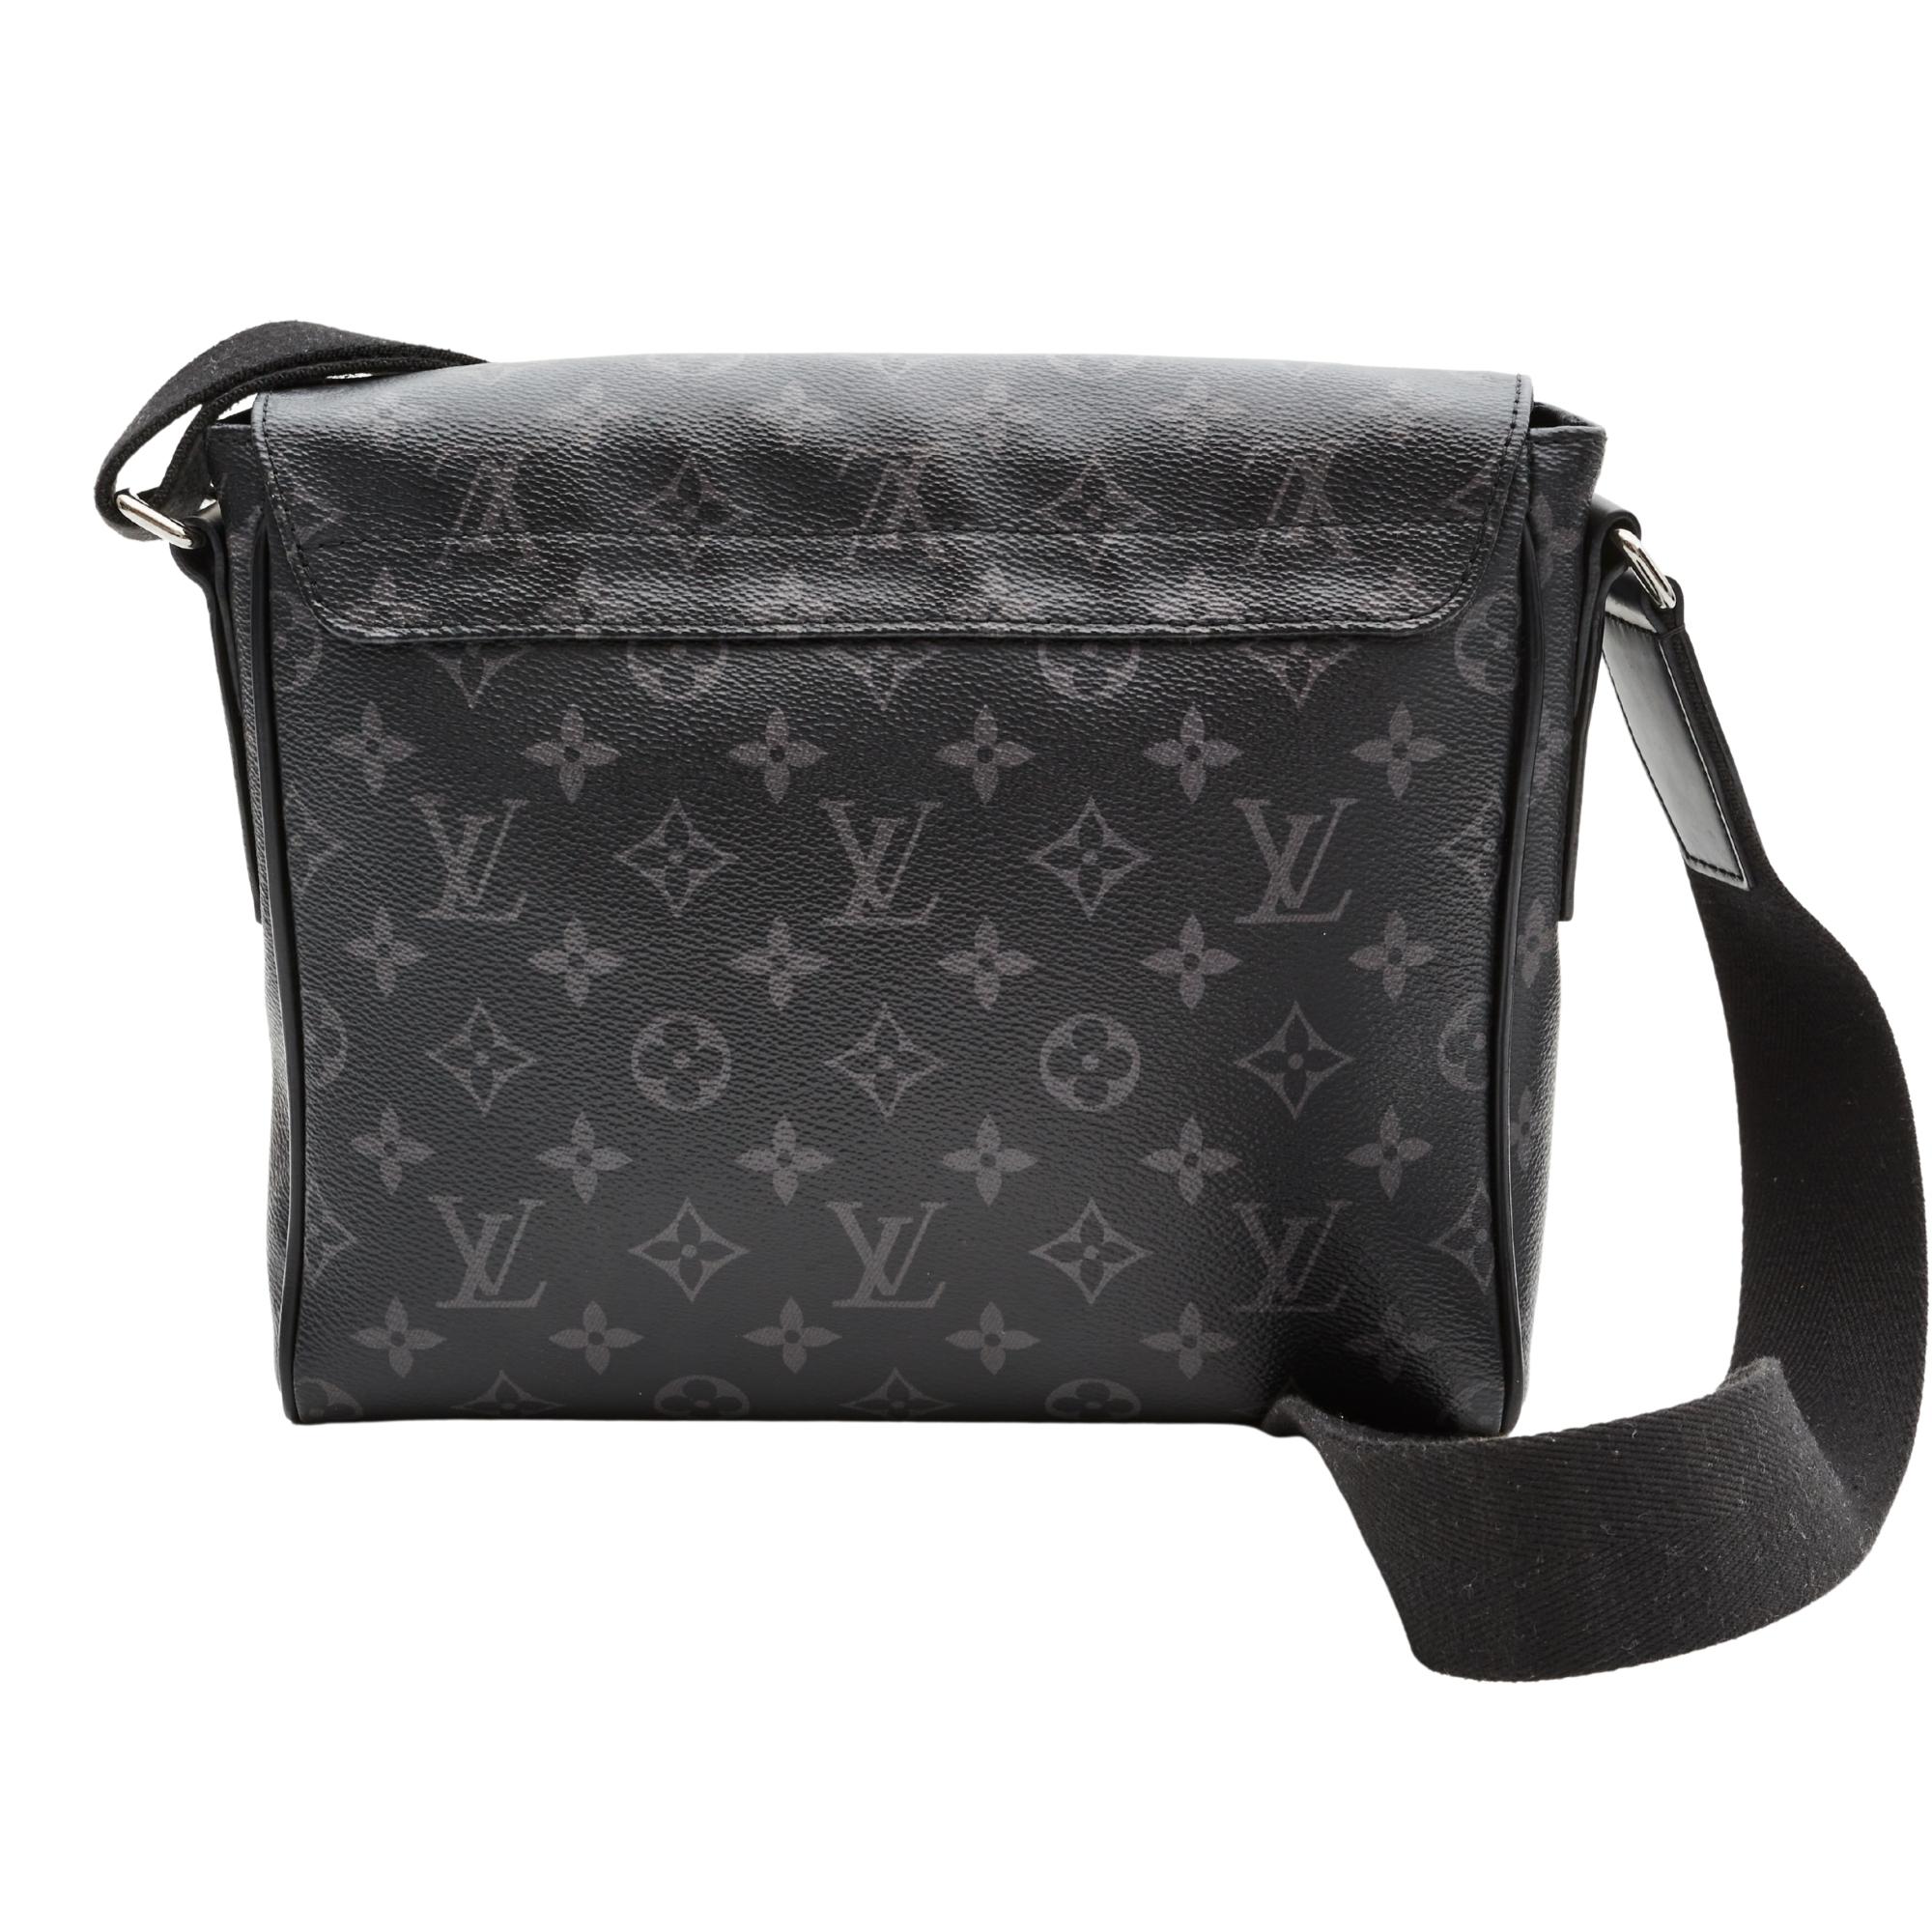 This bag is made with monogram print on toile canvas in graphite with black piping trim. The bag features an adjustable black crossbody strap, polished silver hardware, a front flap with a black Louis Vuitton LV logo and the bag opens to a black